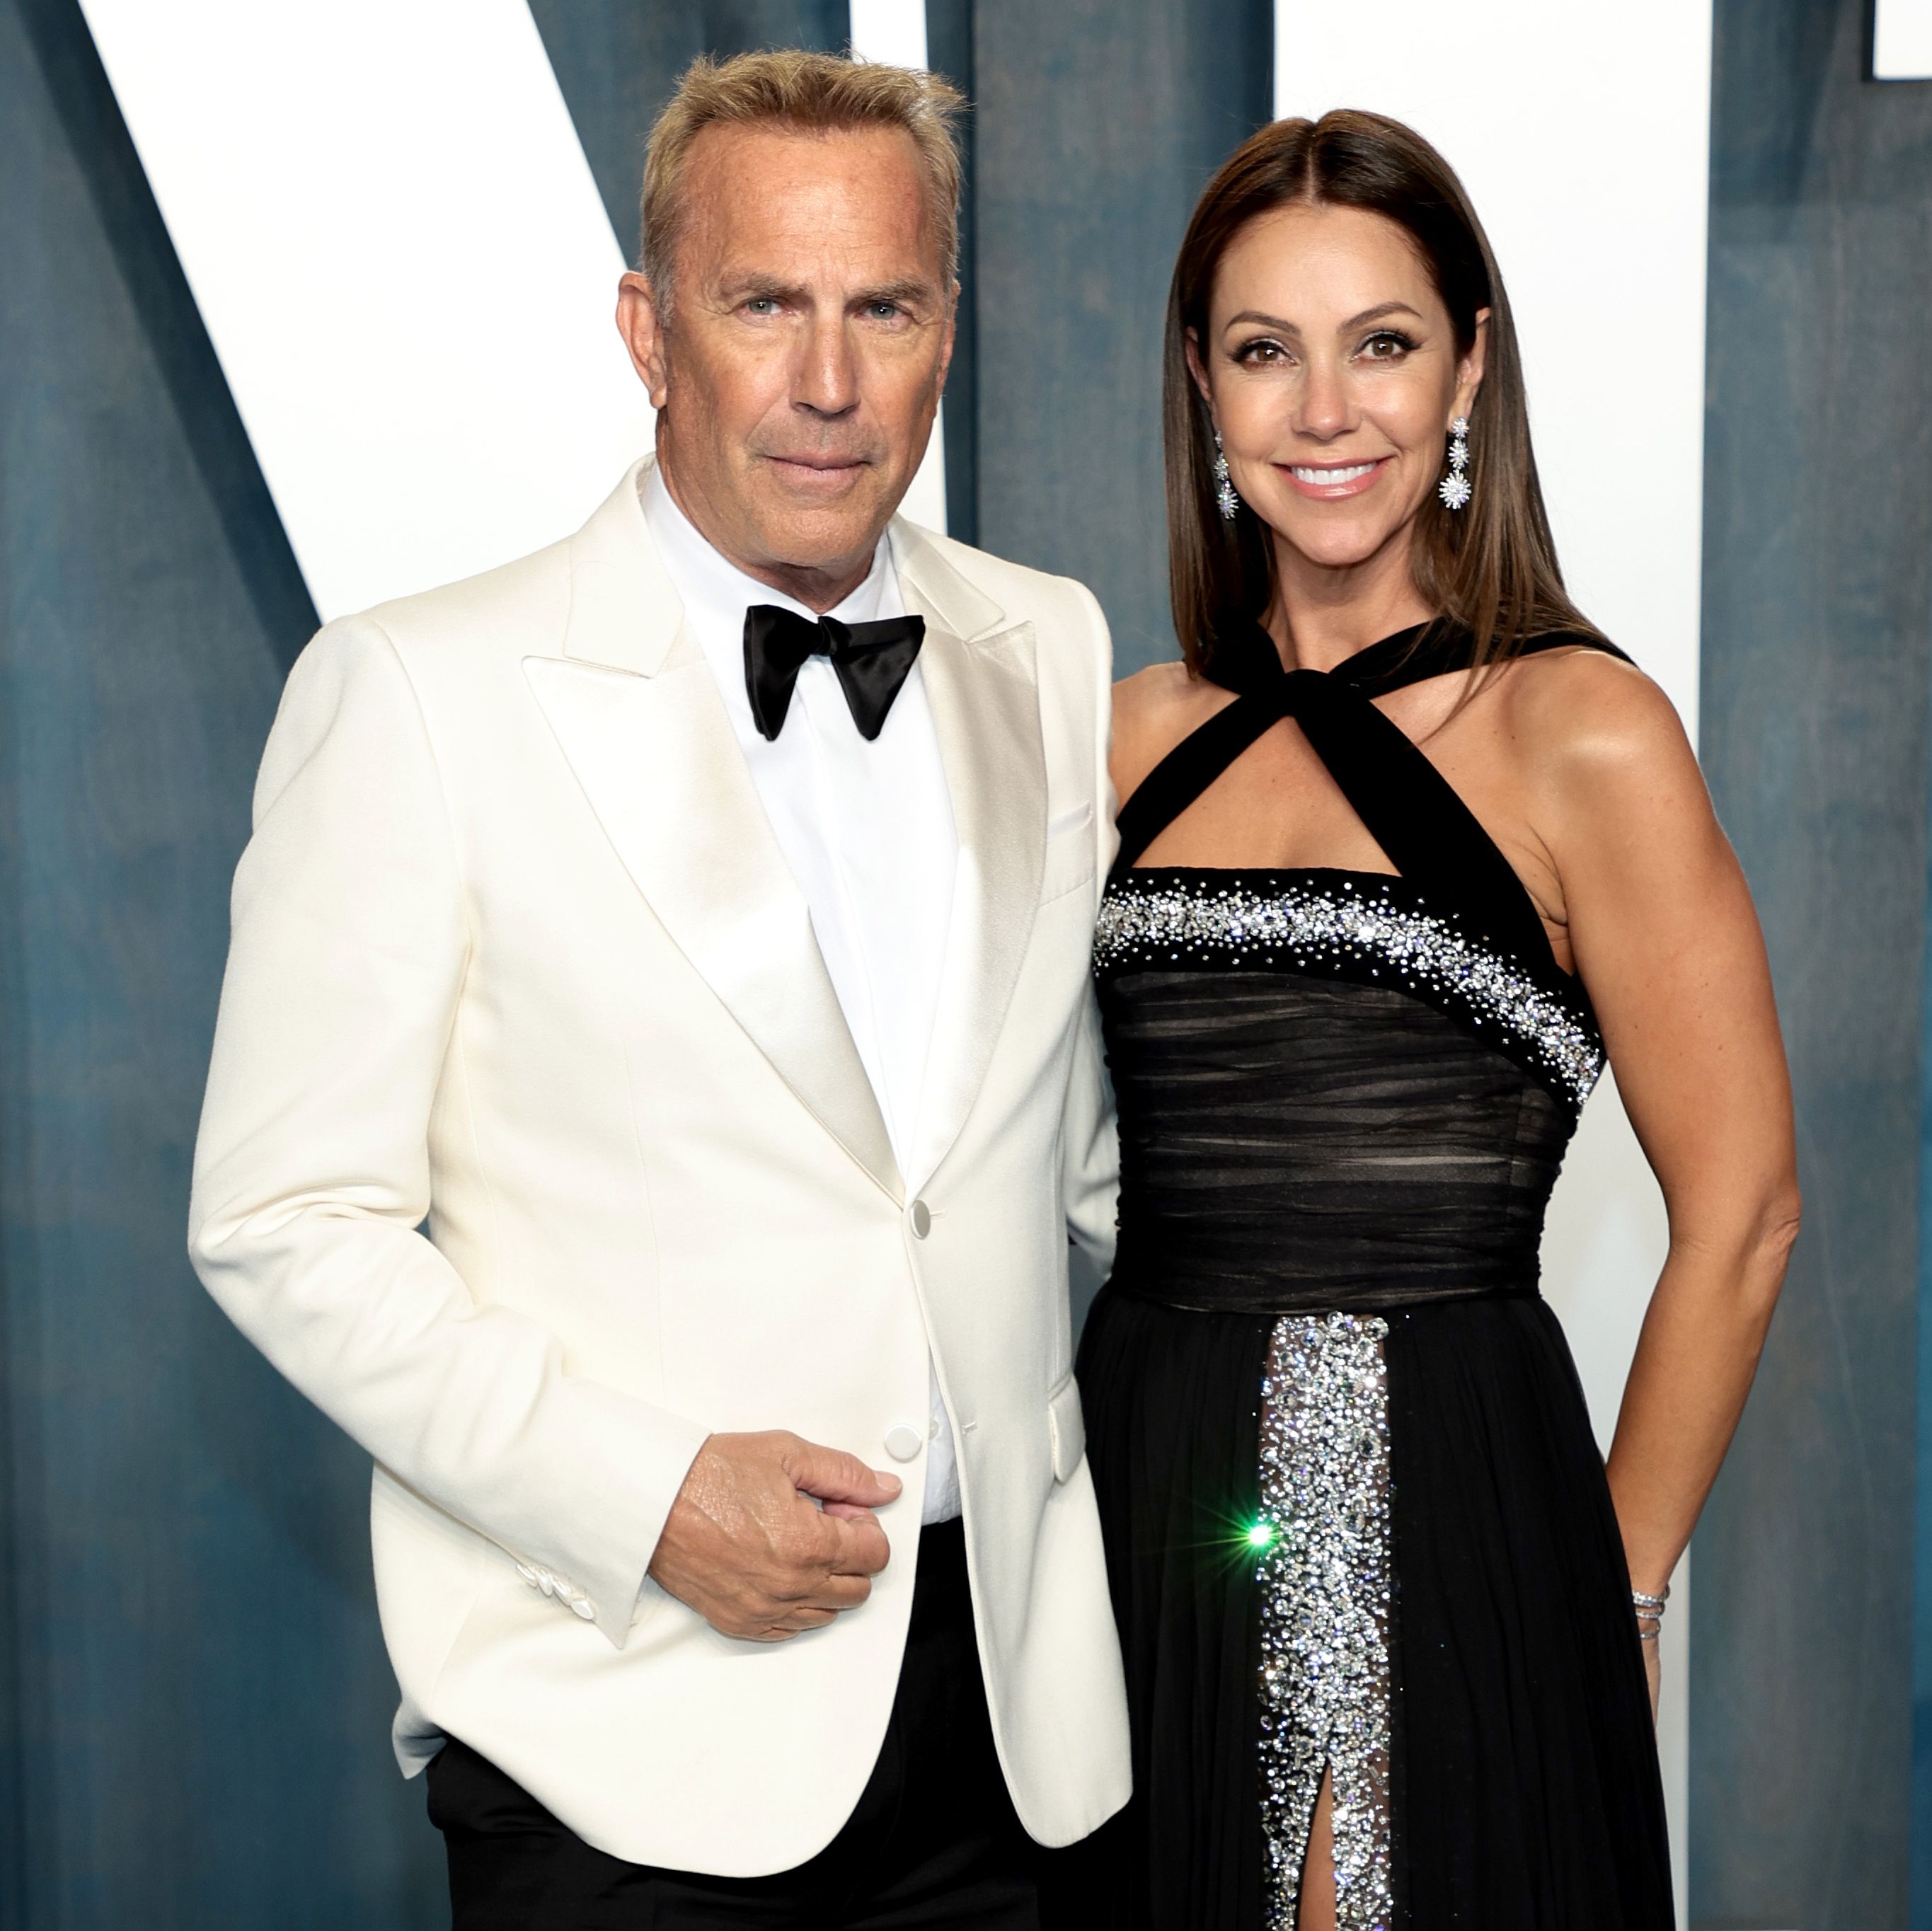 Kevin Costner and His Wife Christine ﻿﻿Baumgartner Have the Cutest Multi-Decade Love Story